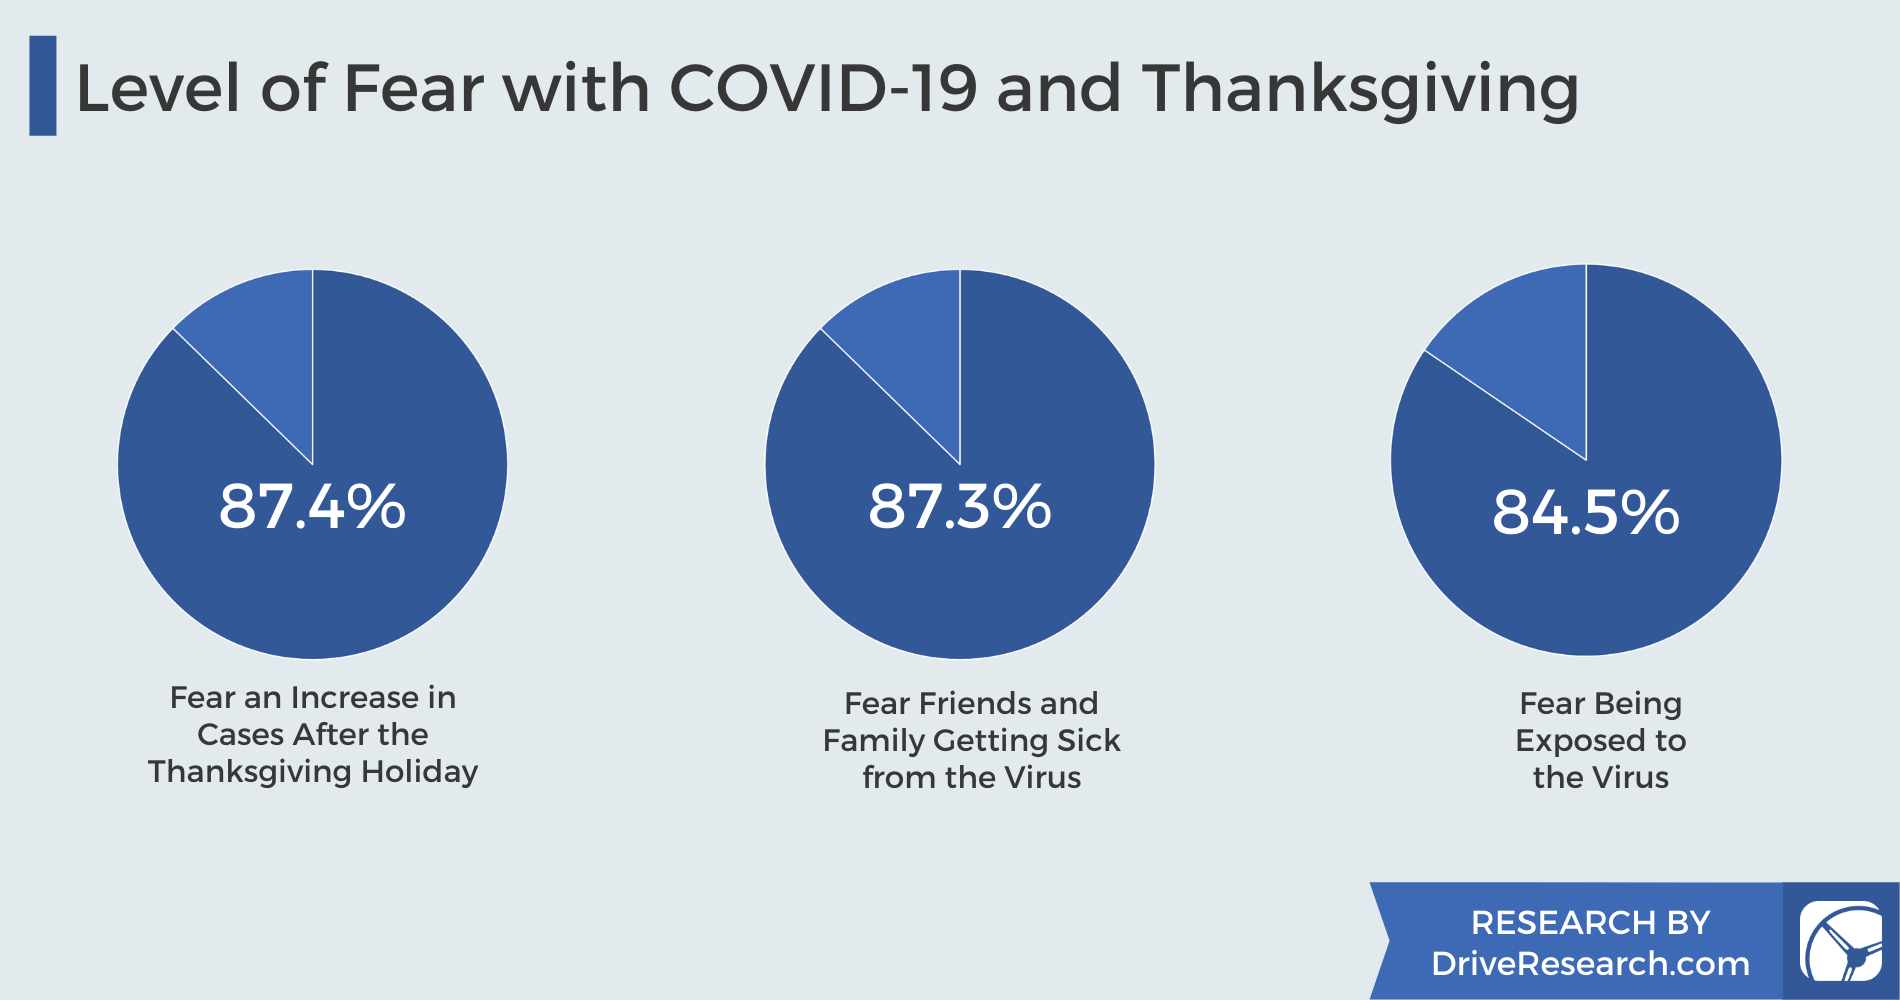 COVID-19 and Thanksgiving Fears for 2020